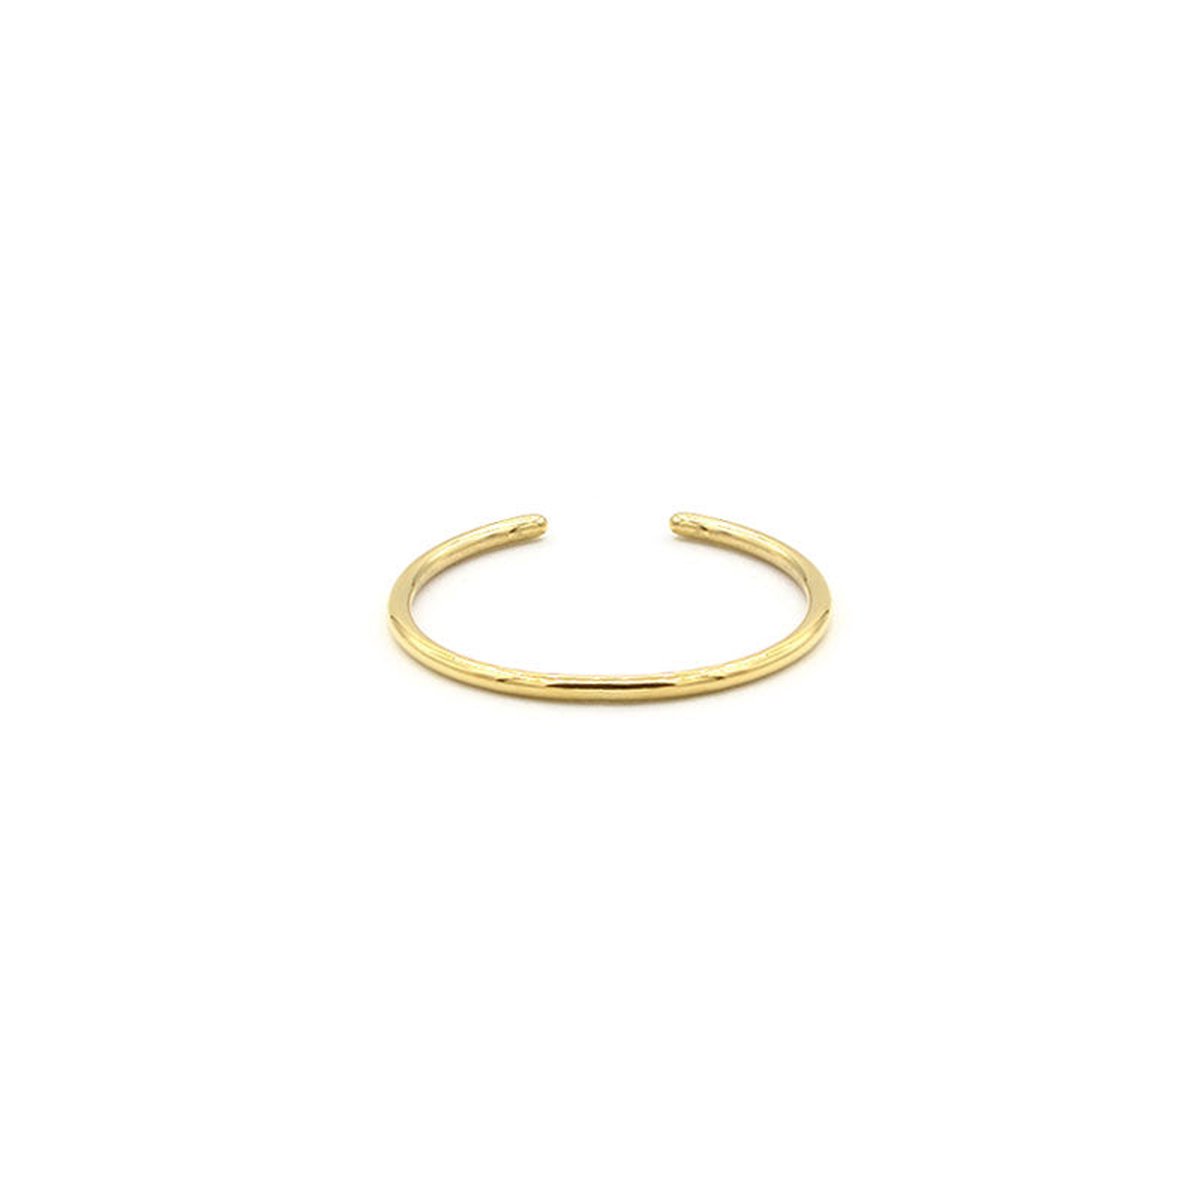 Mint15 Verstelbare ring 'Tiny stacking ring' - Goud RVS/Stainless Steel